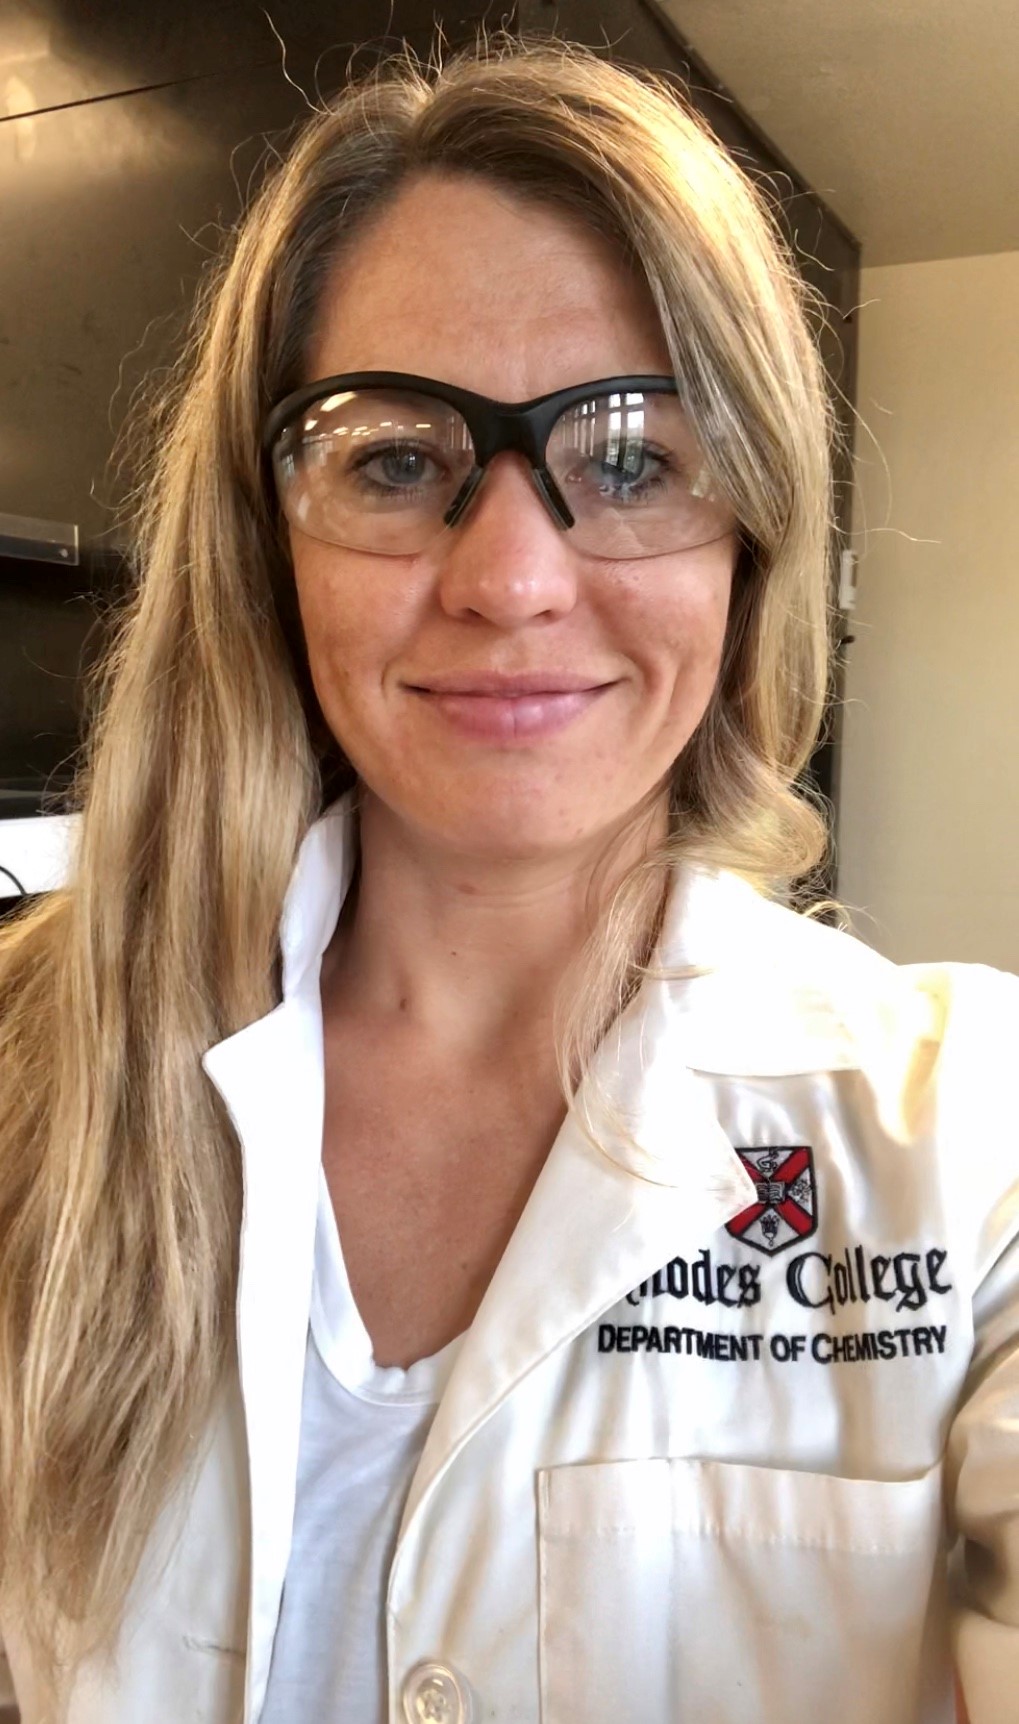 a woman with long blonde hair and safety glasses